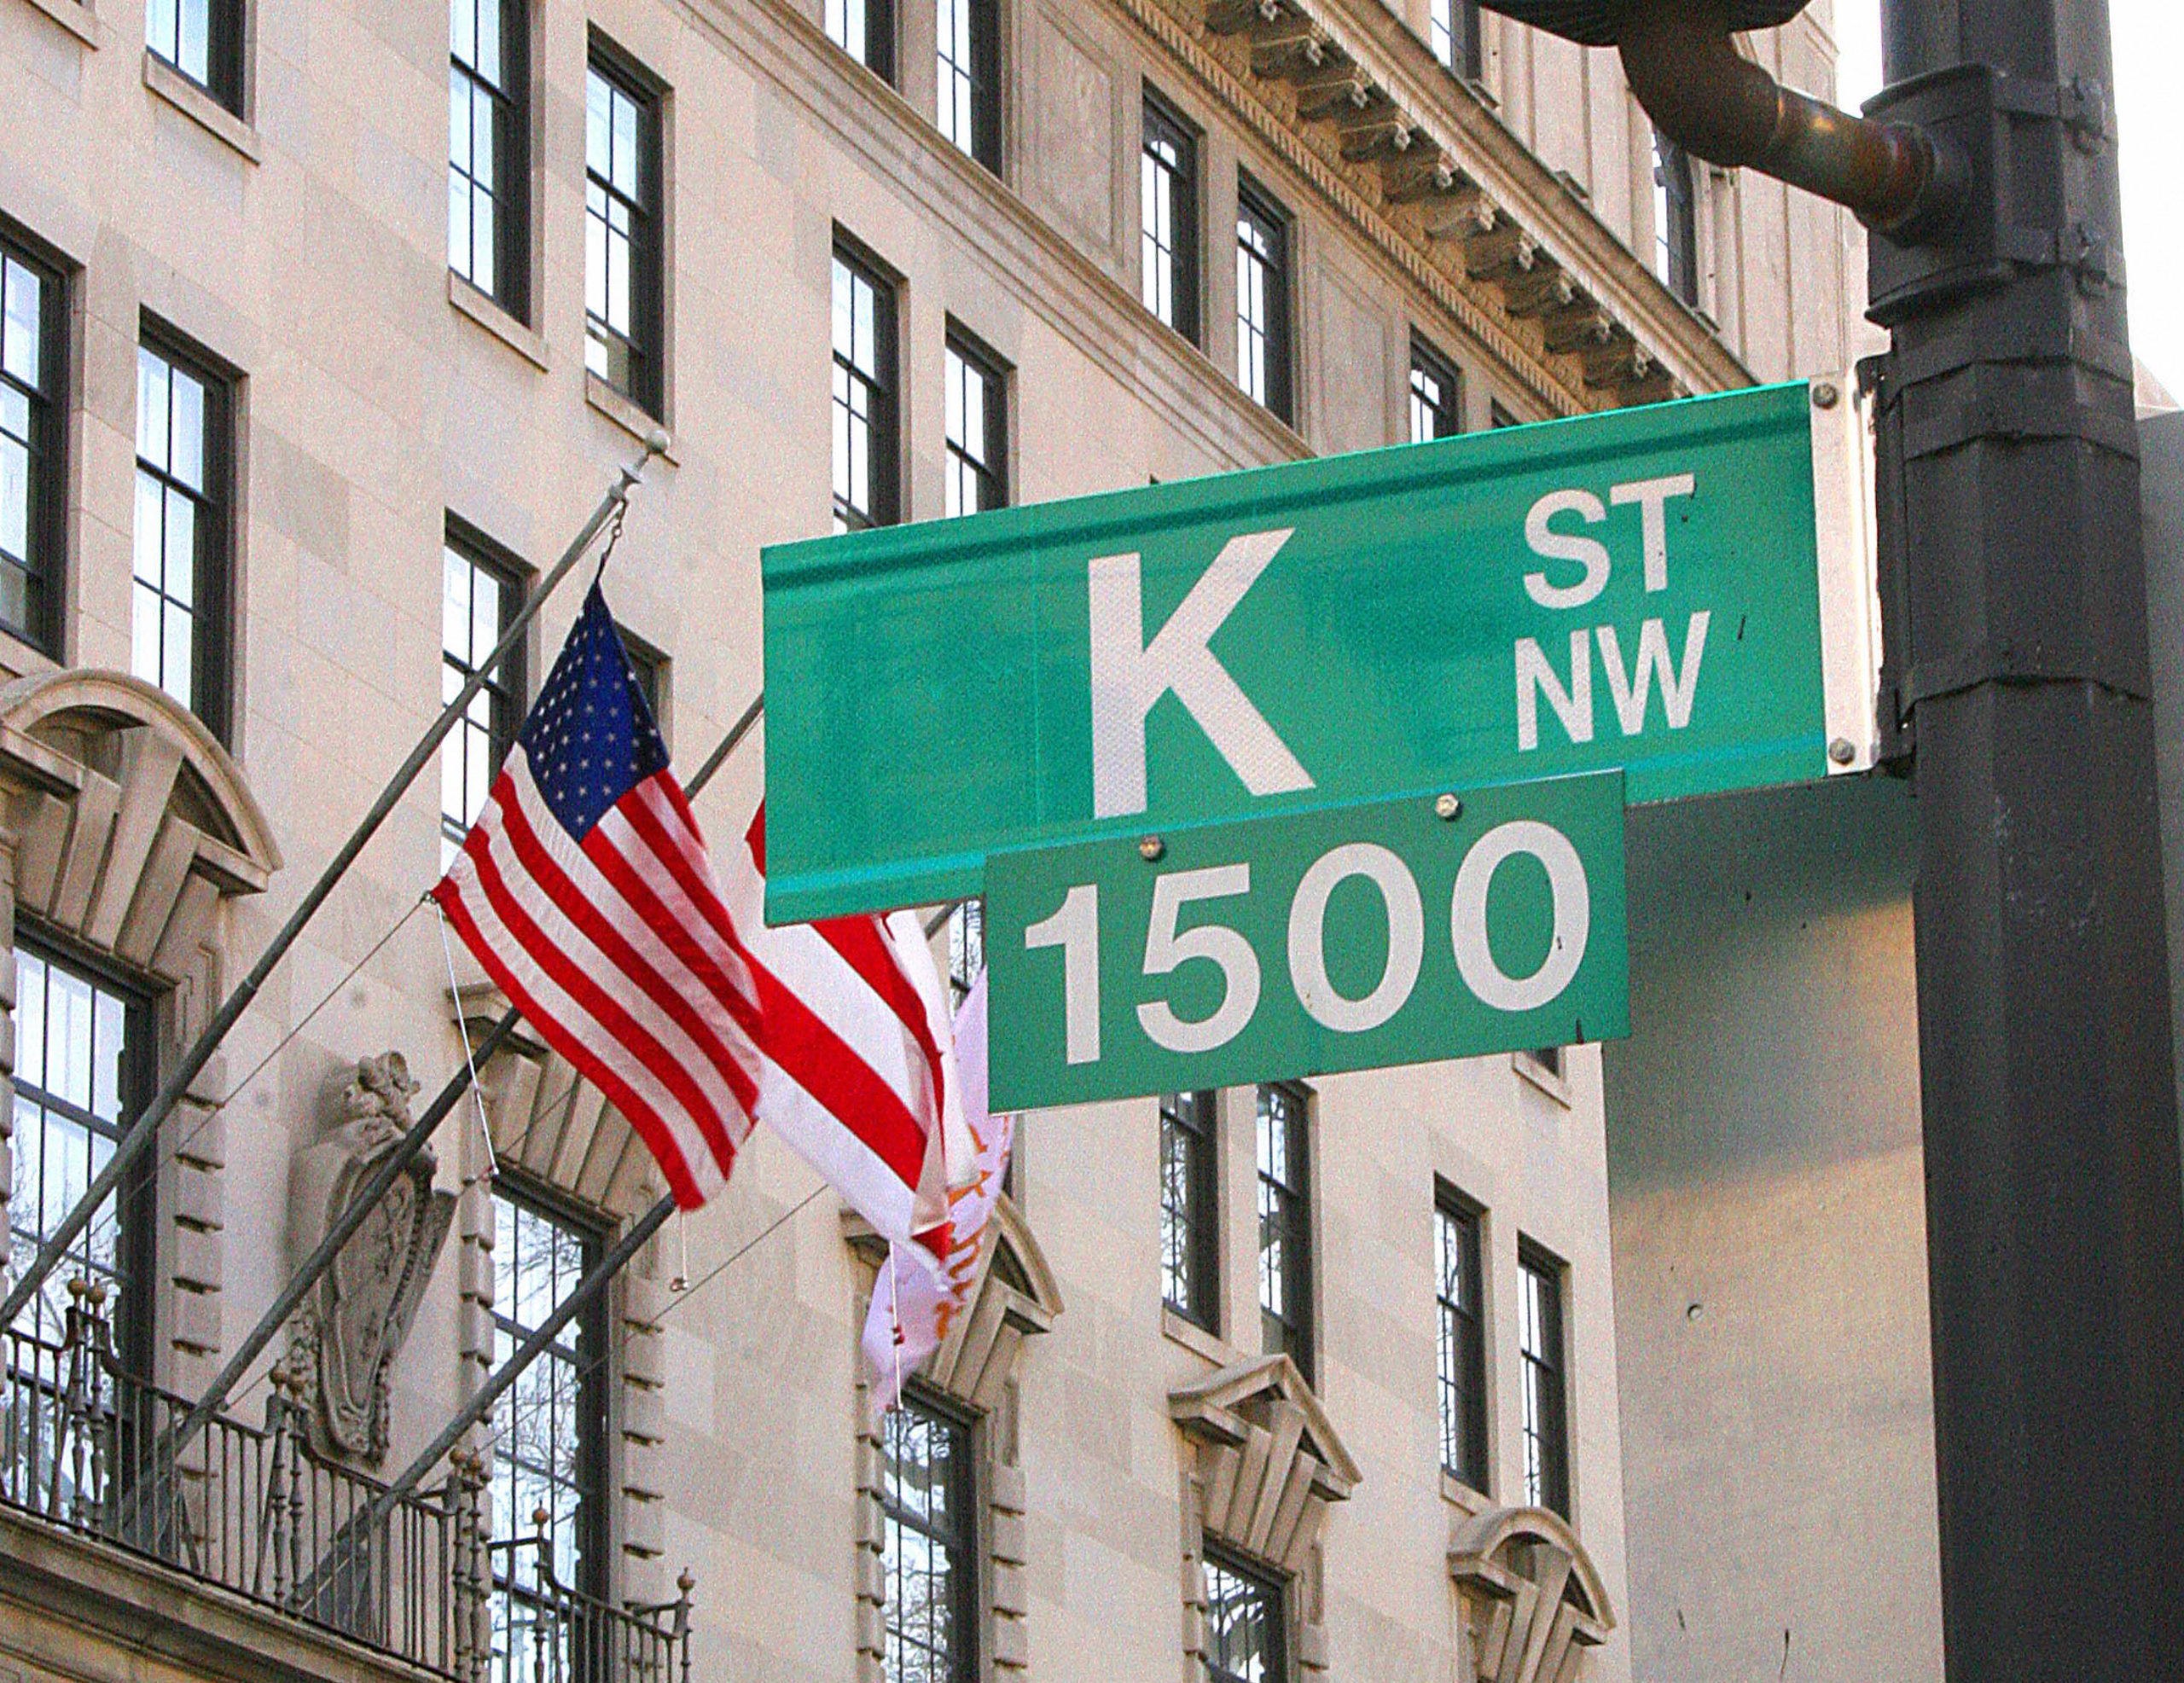 Washington, UNITED STATES: A sign showing K Street is shown 01 February 2006 in Washington,DC. A stone's throw from the White House, K Street is an alternative corridor of power in US politics, packed with thick carpeted offices and lobbyists with even deeper pockets.But the largesse that flowed from Jack Abramoff, an influential member of the K Street lobbying army, threatens now to rebound against the whole sector. Both opposition Democrats, and President George W. Bush's majority Republicans, who face the most serious charges from the Abramoff scandal, are making proposals to clamp down on lobbyists.There are an estimated 30,000 lobbyists working in Washington, mainly lawyers, working for groups ranging from big business contract hunters to turkey hunters who feel their pastime is under threat.For example, Akin, Gump, Strauss, Hauer and and Felt, a Texan firm, has about 100 lawyers in Washington who represent some 200 pressure groups and associations, making sure that lawmakers are aware of their concerns. AFP PHOTO/KAREN BLEIER (Photo credit should read KAREN BLEIER/AFP via Getty Images)